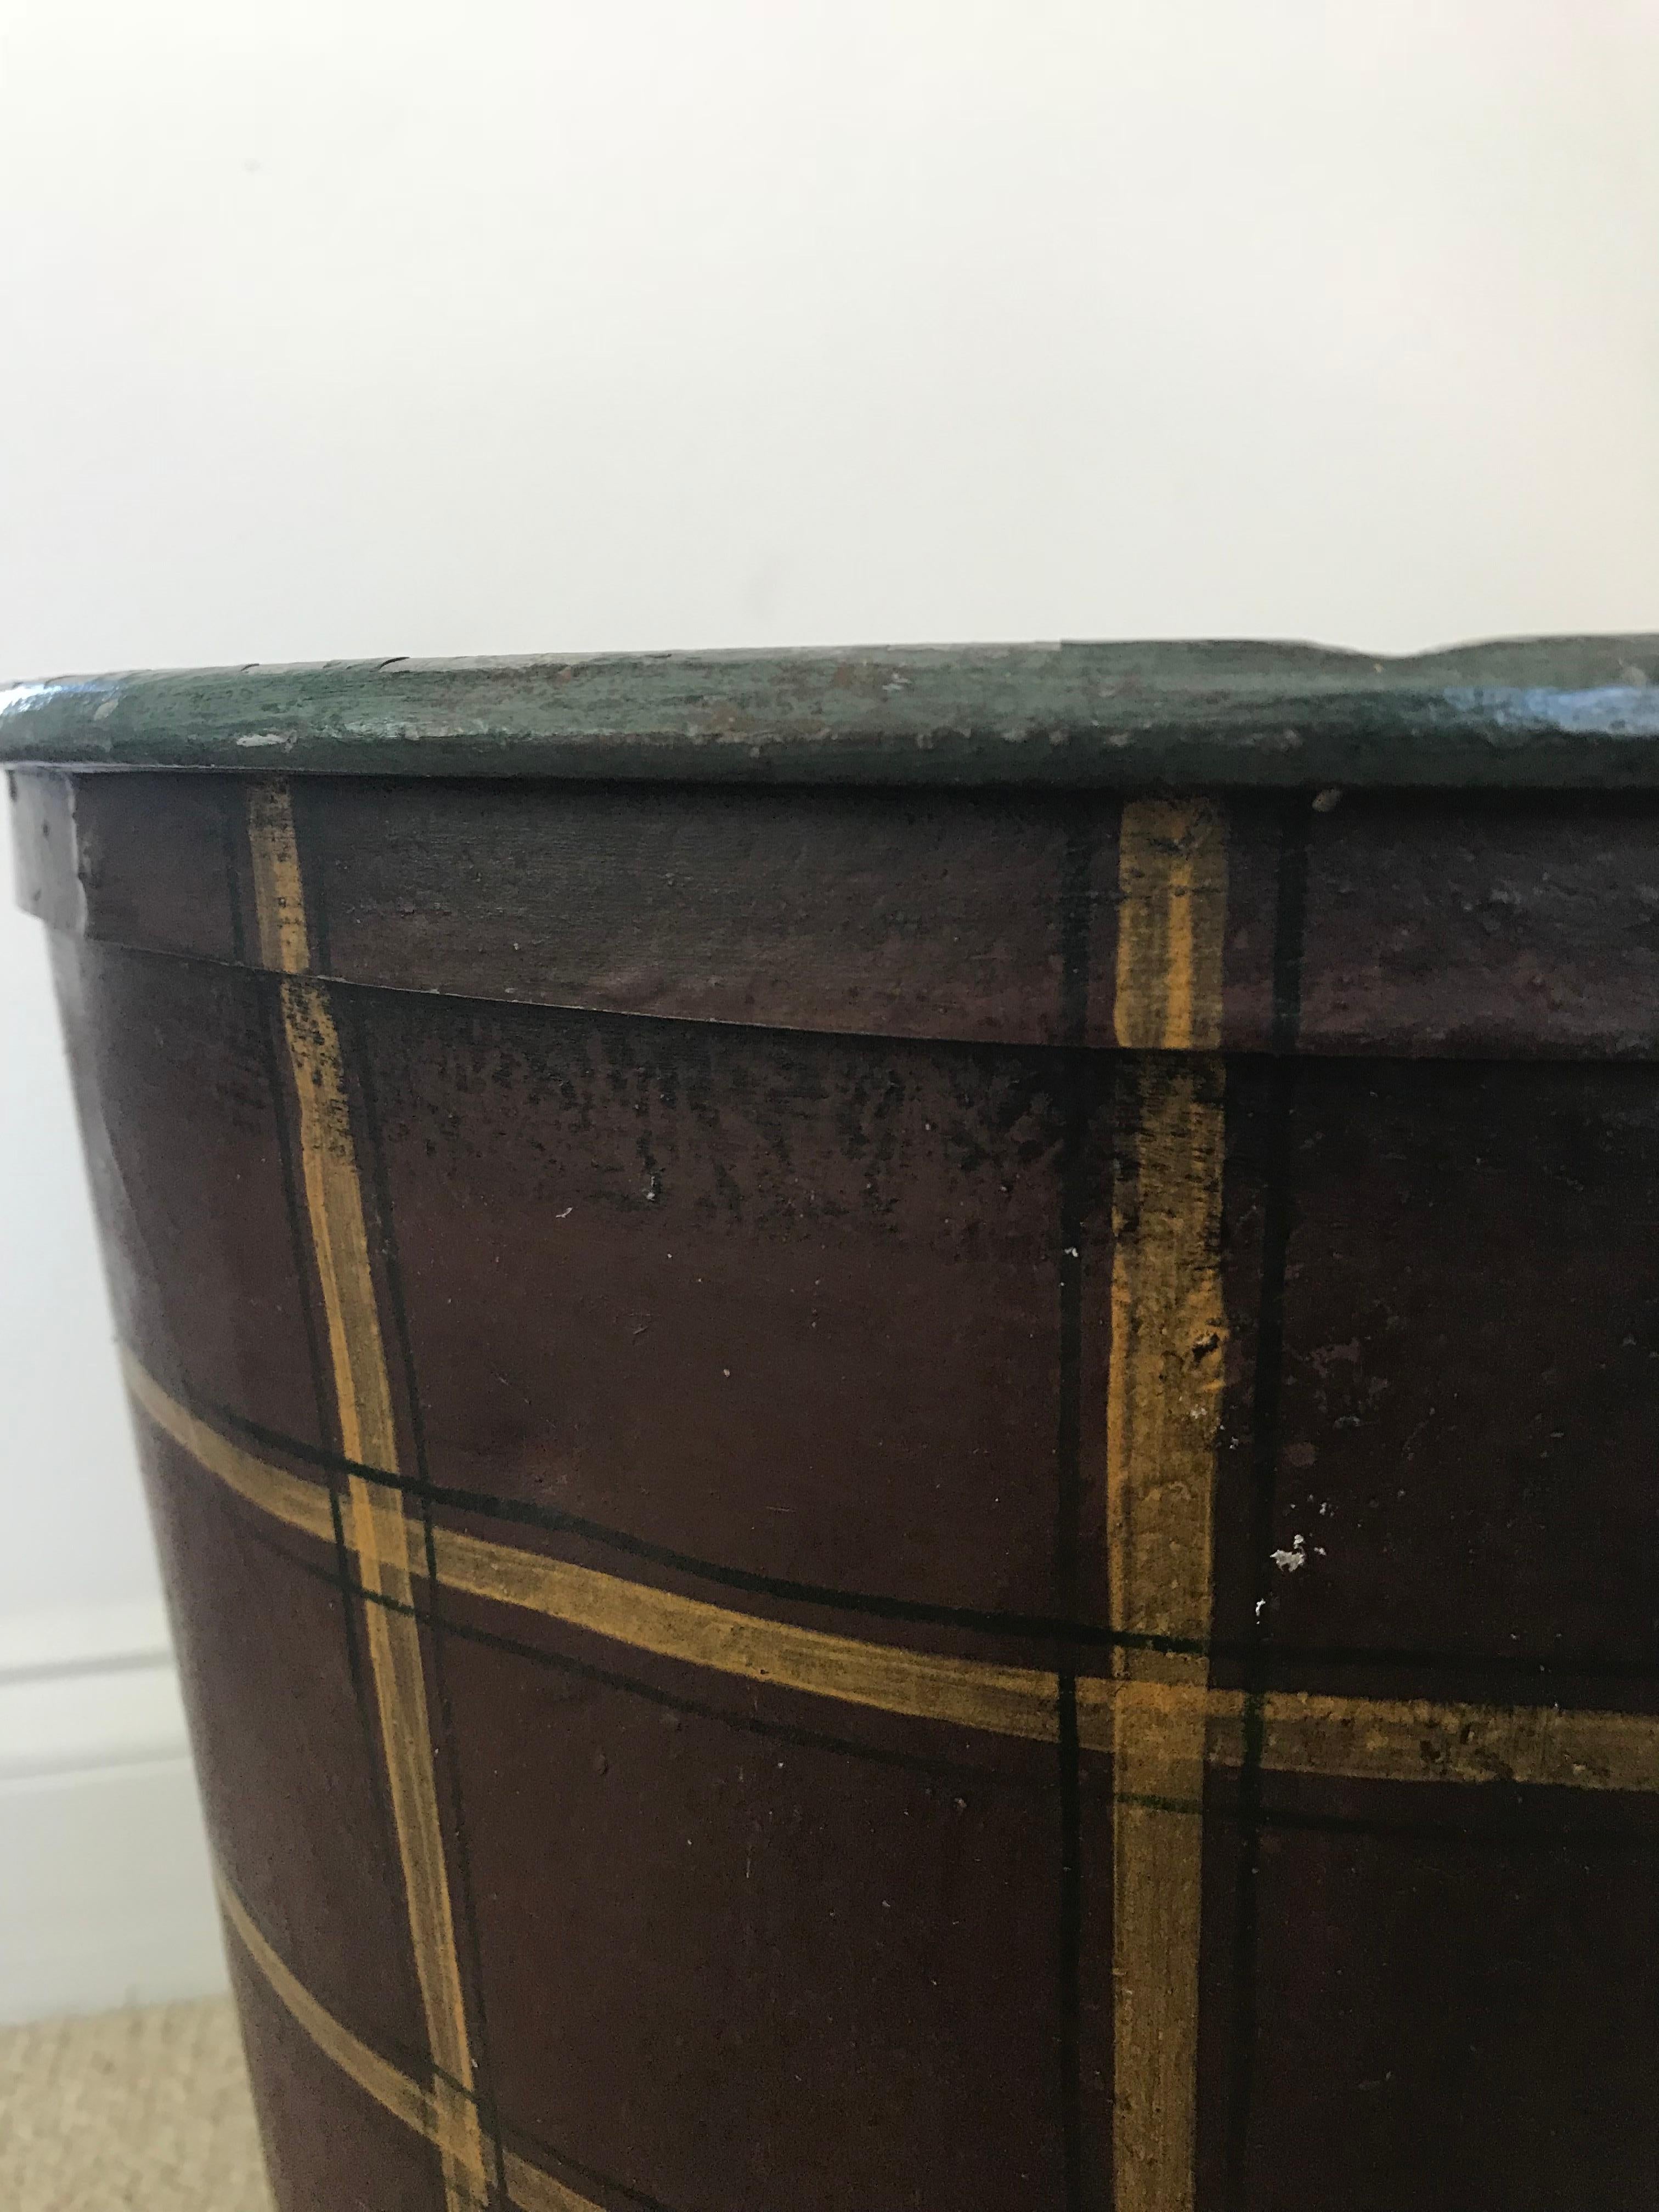 20th Century Hand-Painted English Bucket for Logs or Plants